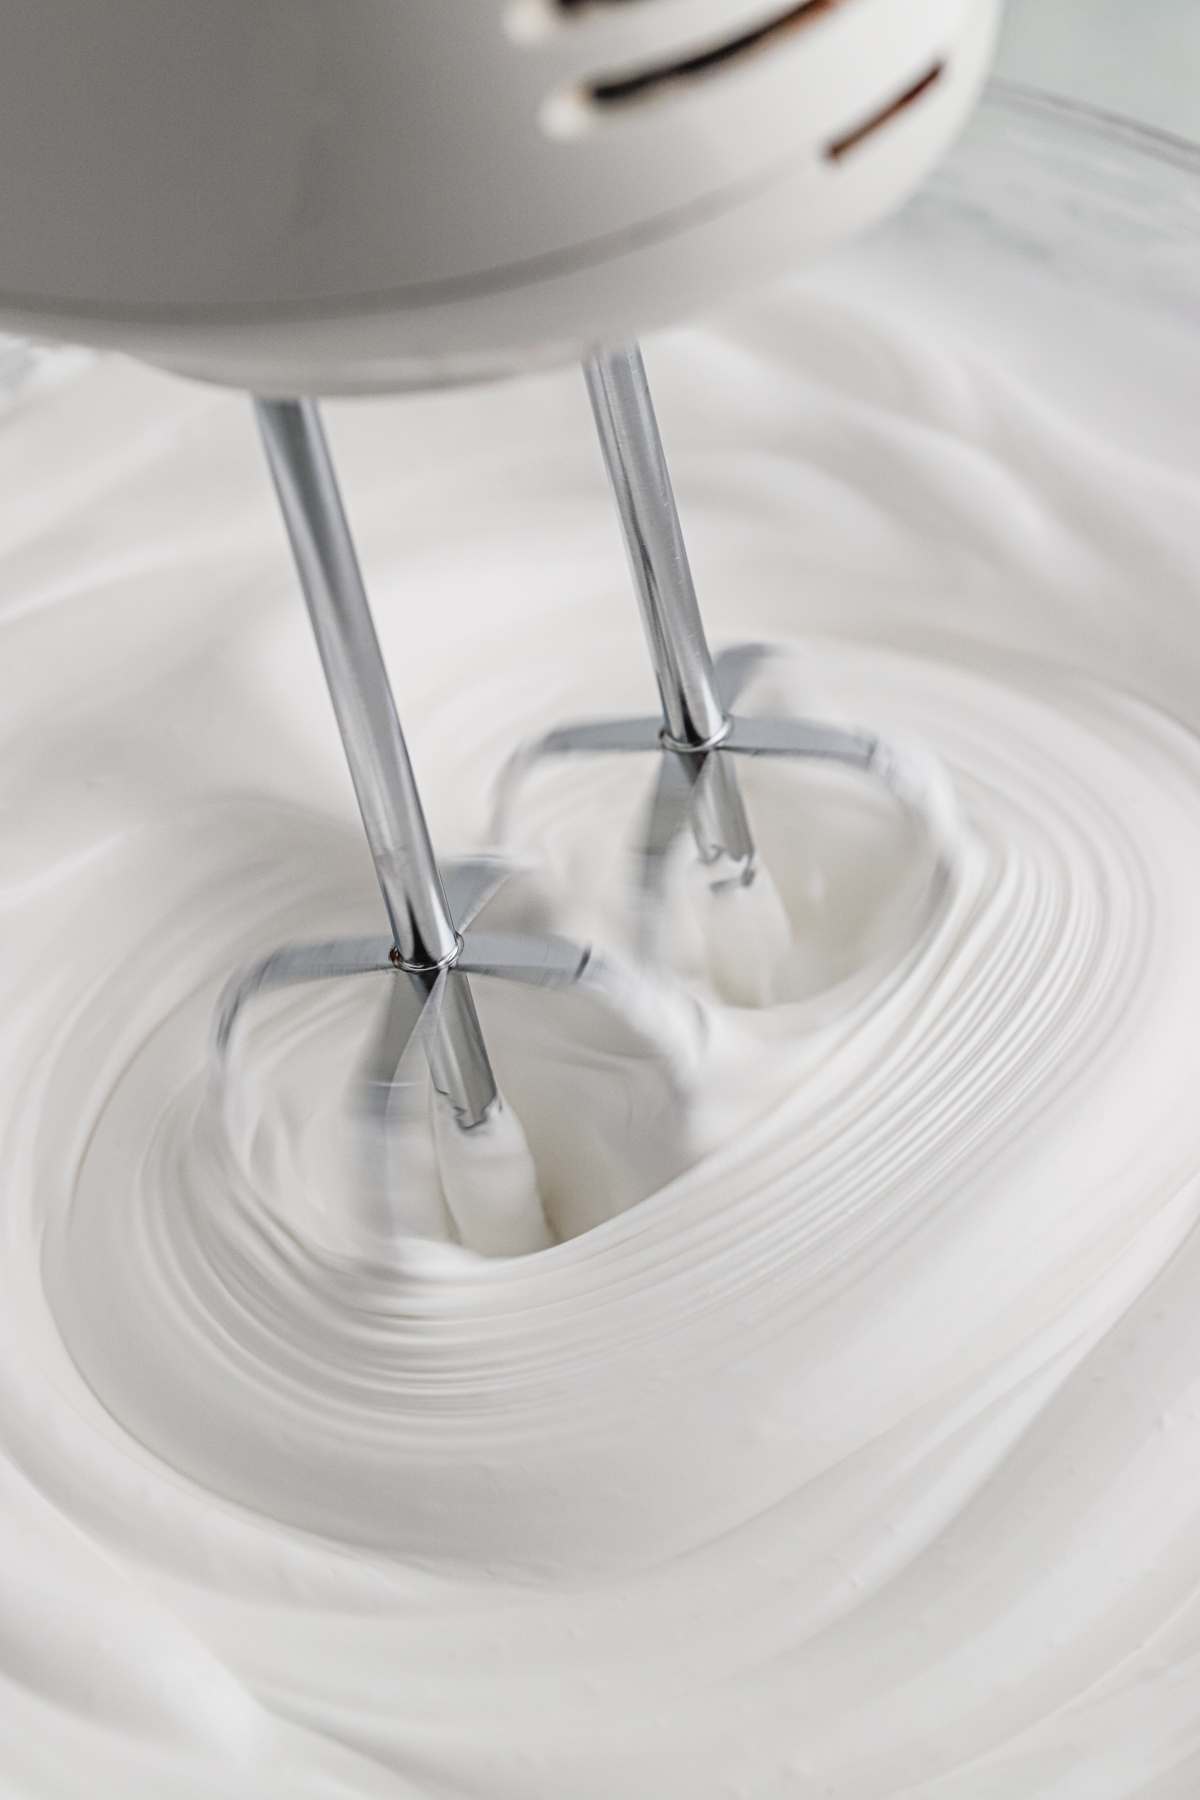 A hand mixer in a bowl of seven minute frosting.